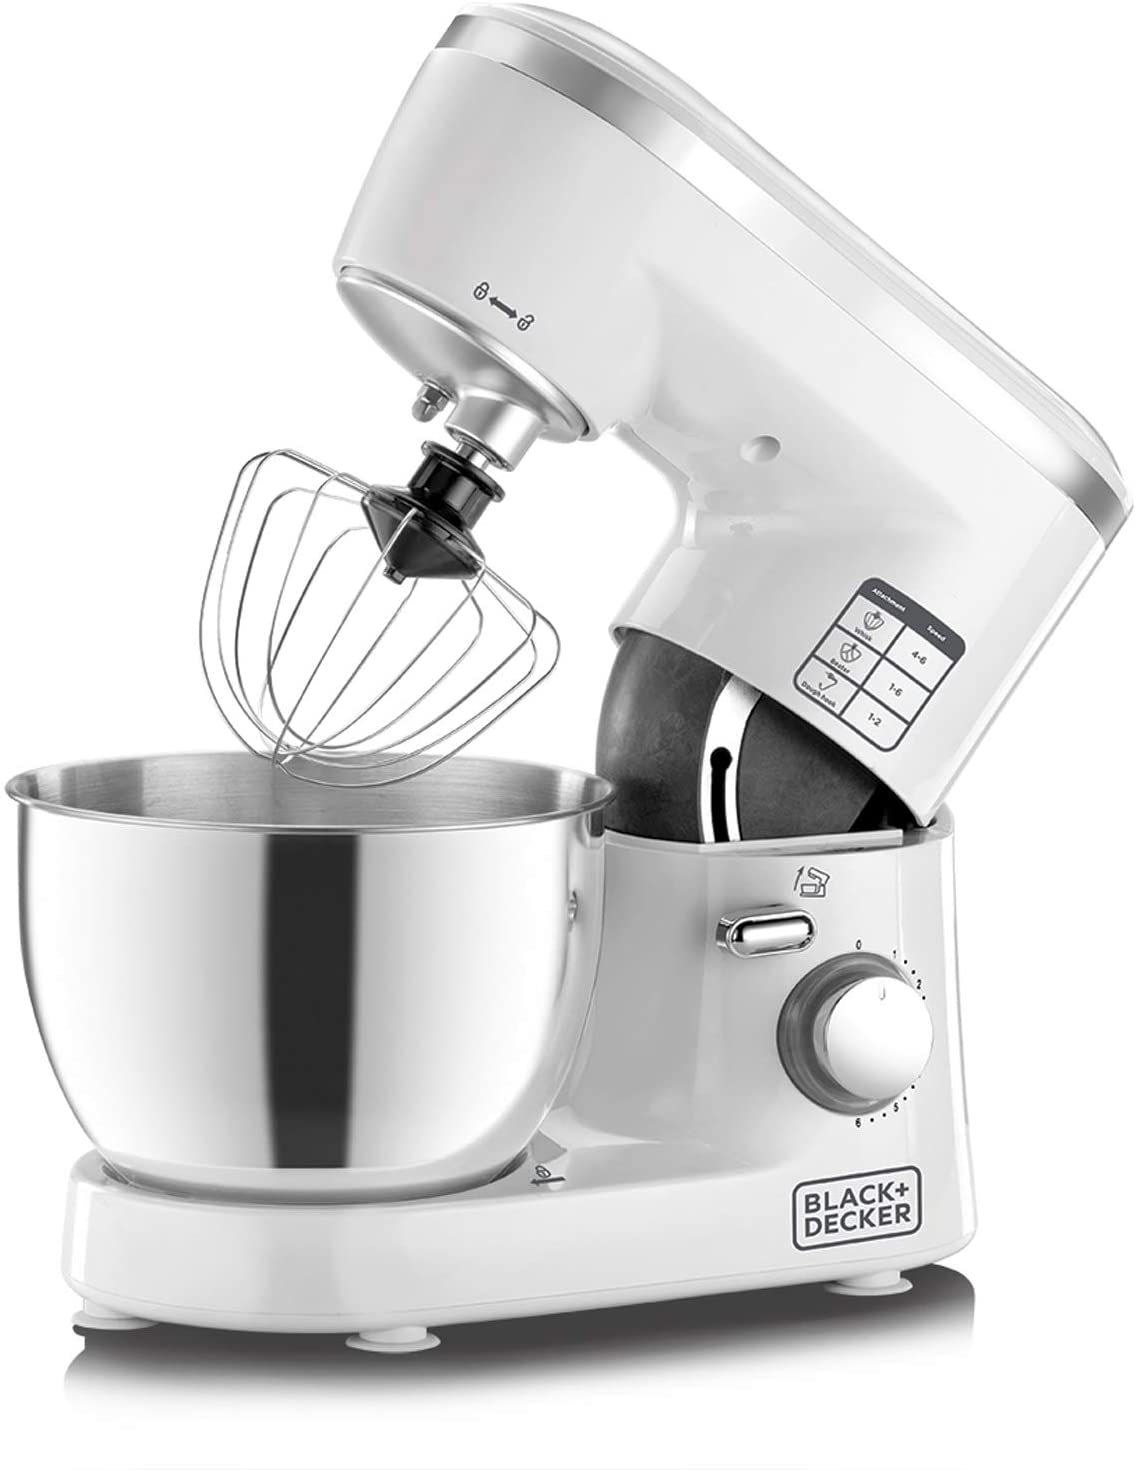 Black+Decker, 1000W 6 Speed Stand Mixer with Stainless Steel Bowl, SM1000